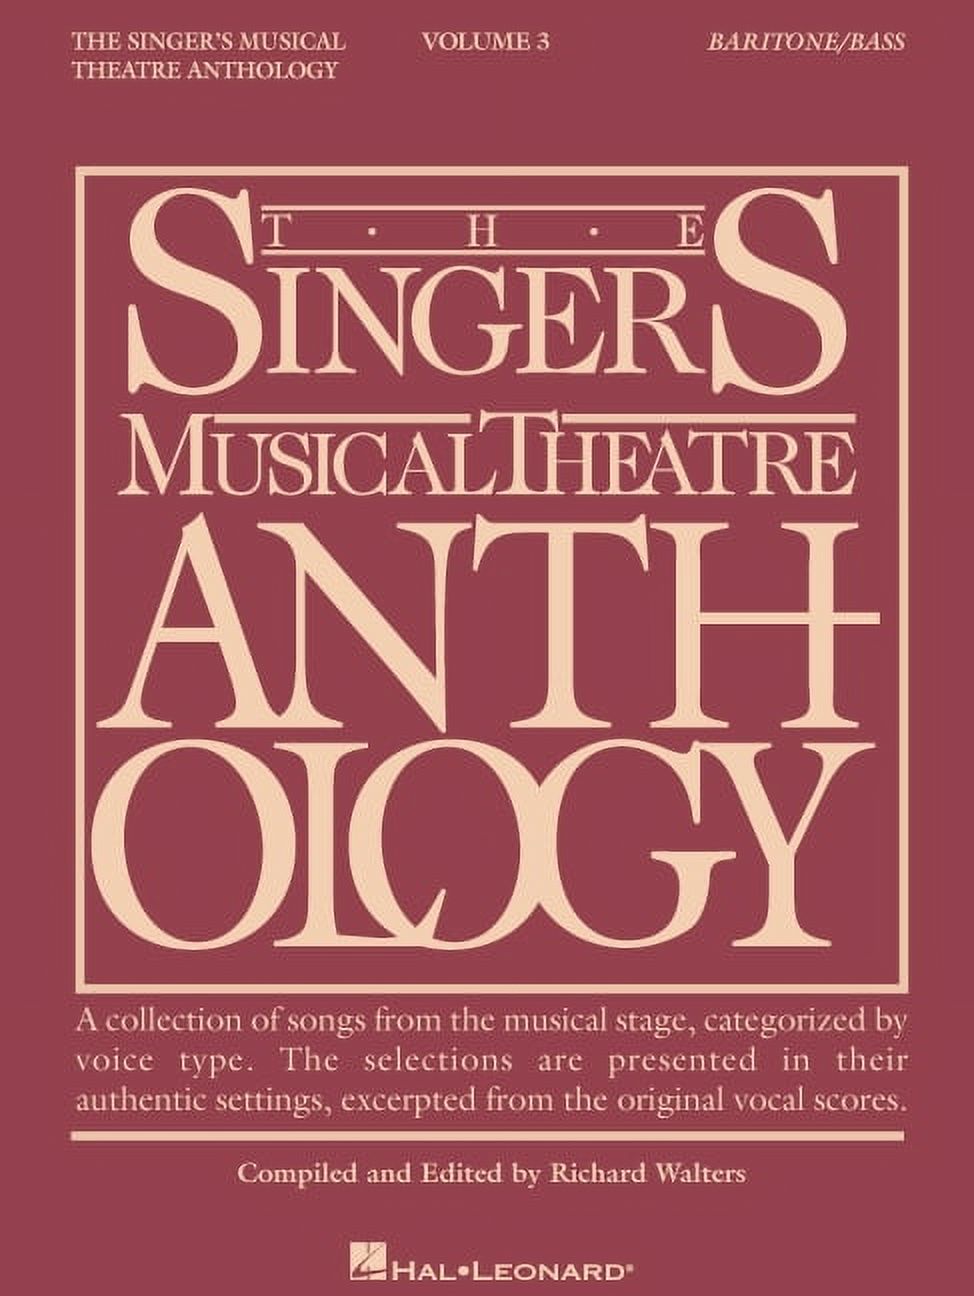 Singer's Musical Theatre Anthology (Songbooks): The Singer's Musical Theatre Anthology - Volume 3 (Paperback) - image 1 of 1